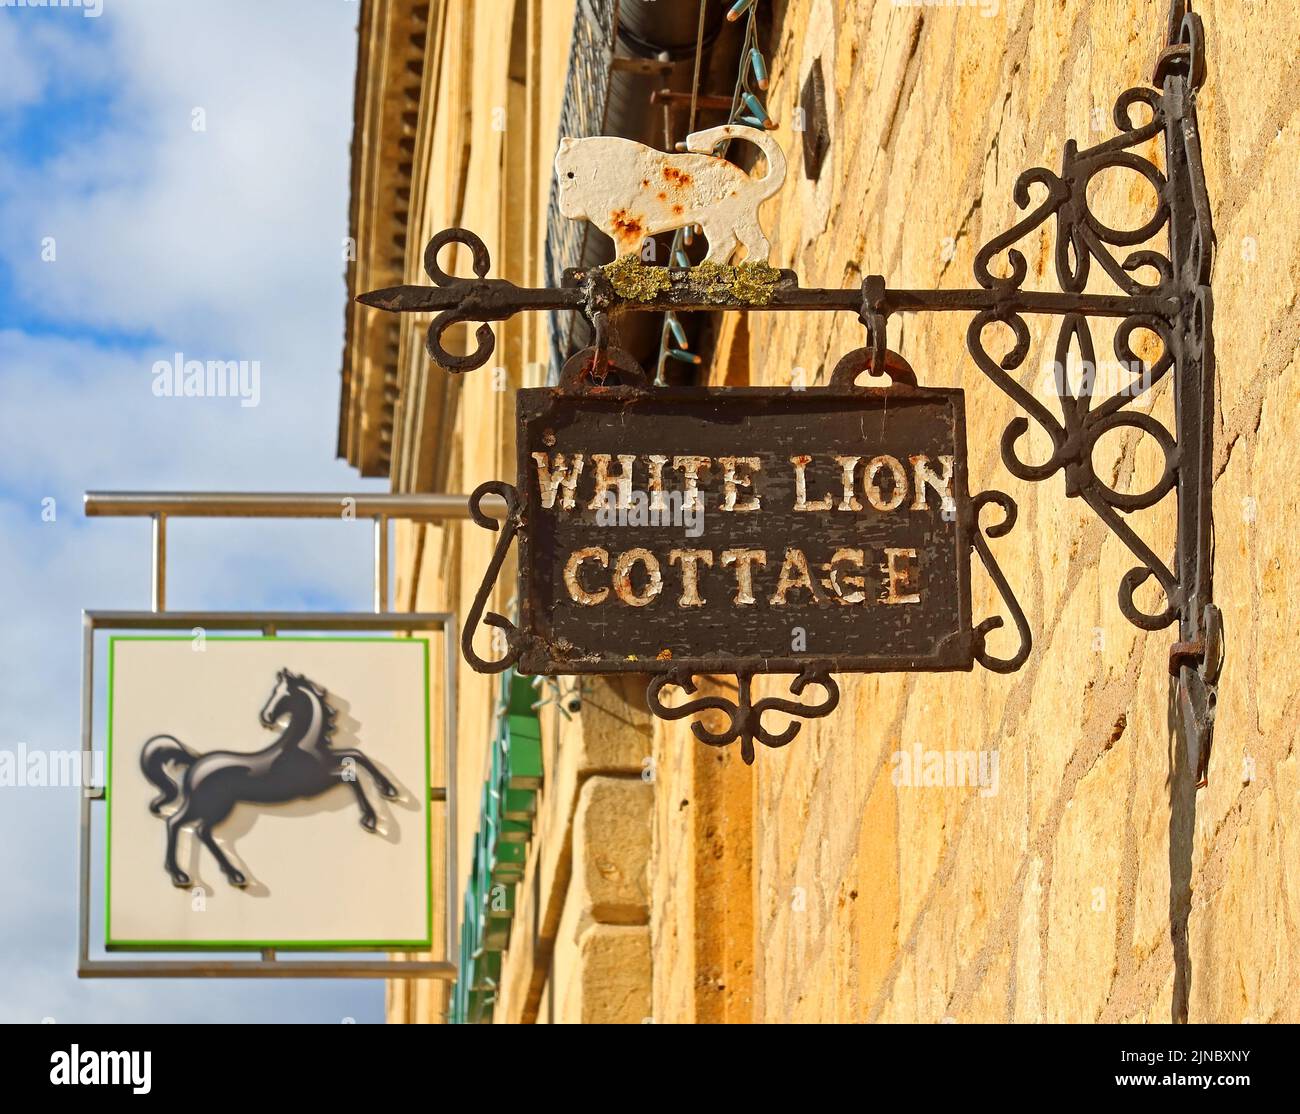 White Lion Cottage 1732, Lloyds, High St, Moreton-in-Marsh, Evenlode Valley, Cotswold District Council, Gloucestershire, England, Vereinigtes Königreich, GL56 0AY Stockfoto